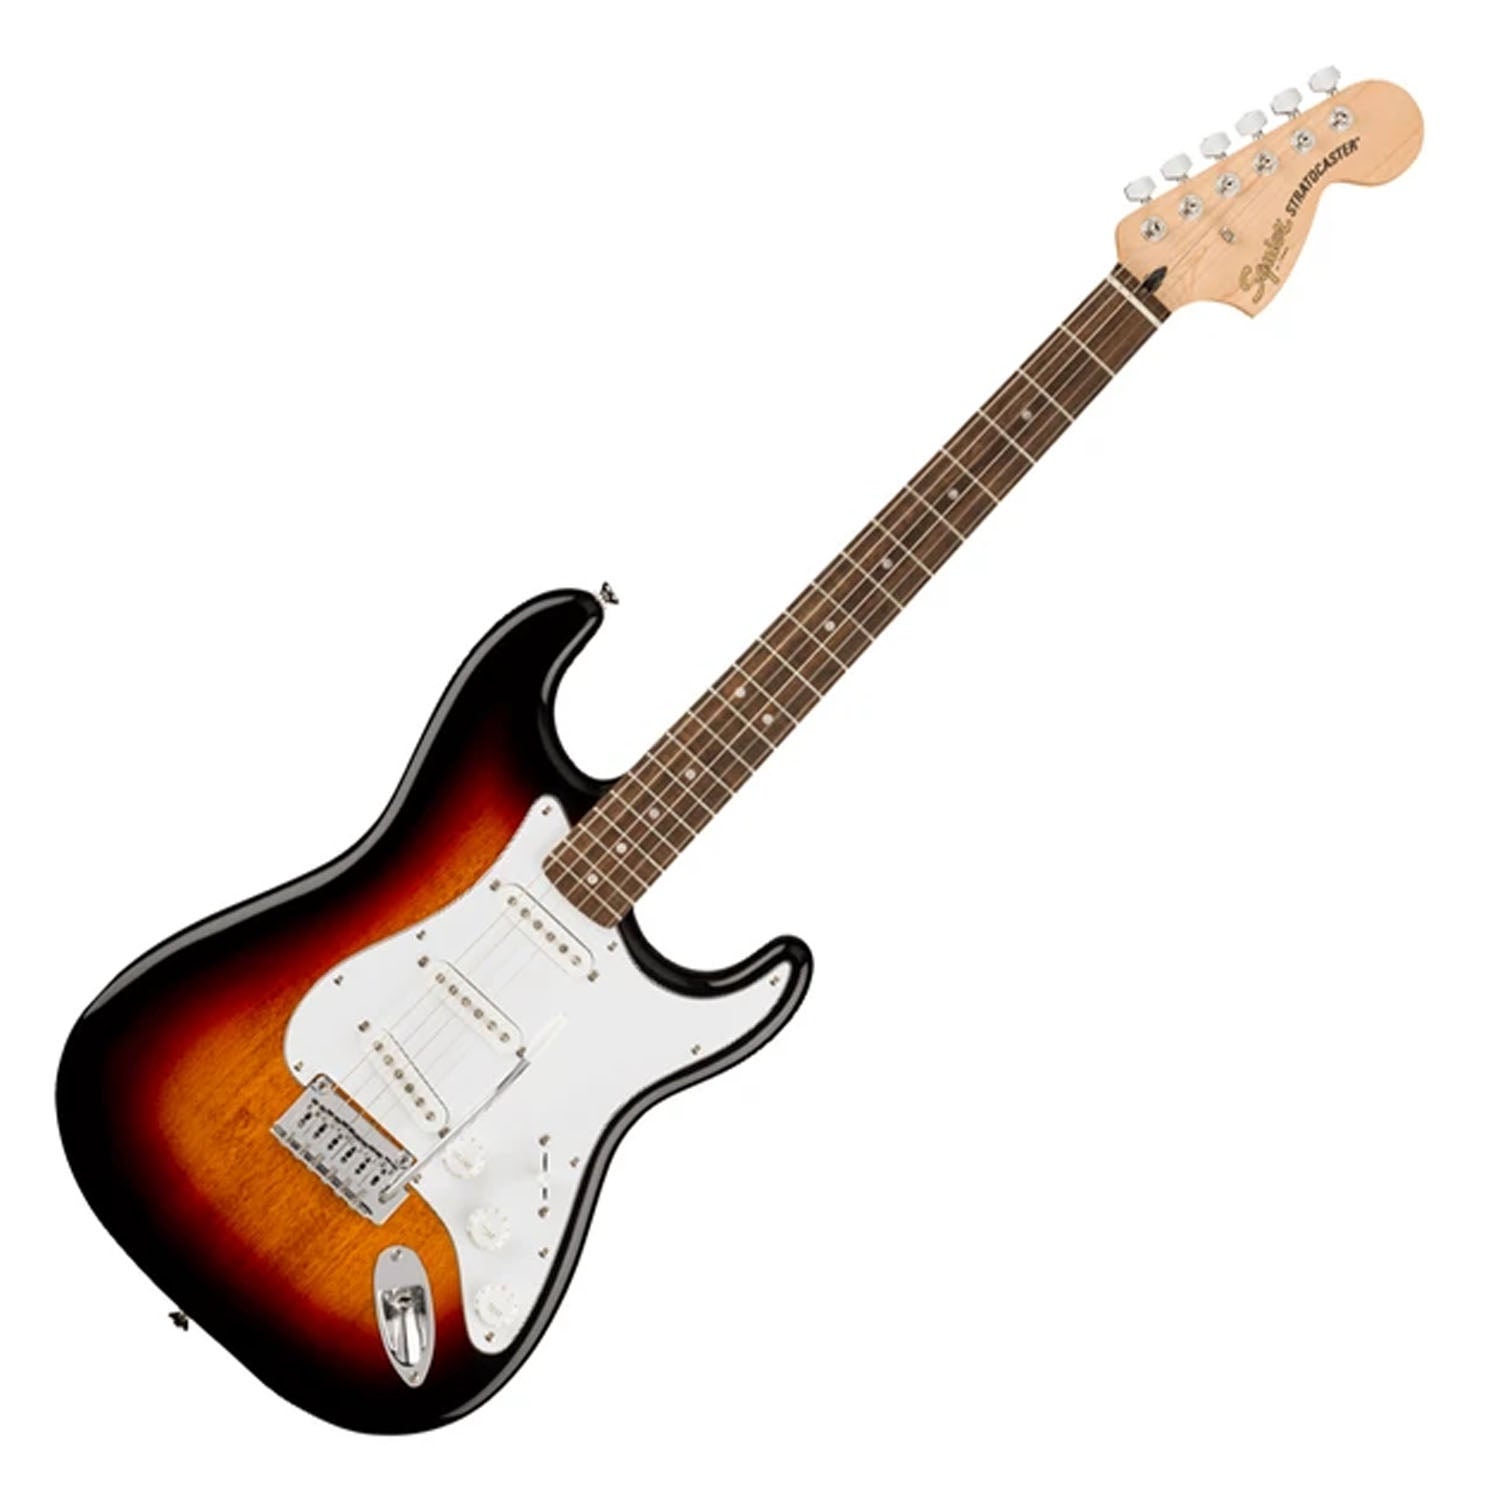 Fender 0378000500 Squier Affinity Series Stratocaster Electric